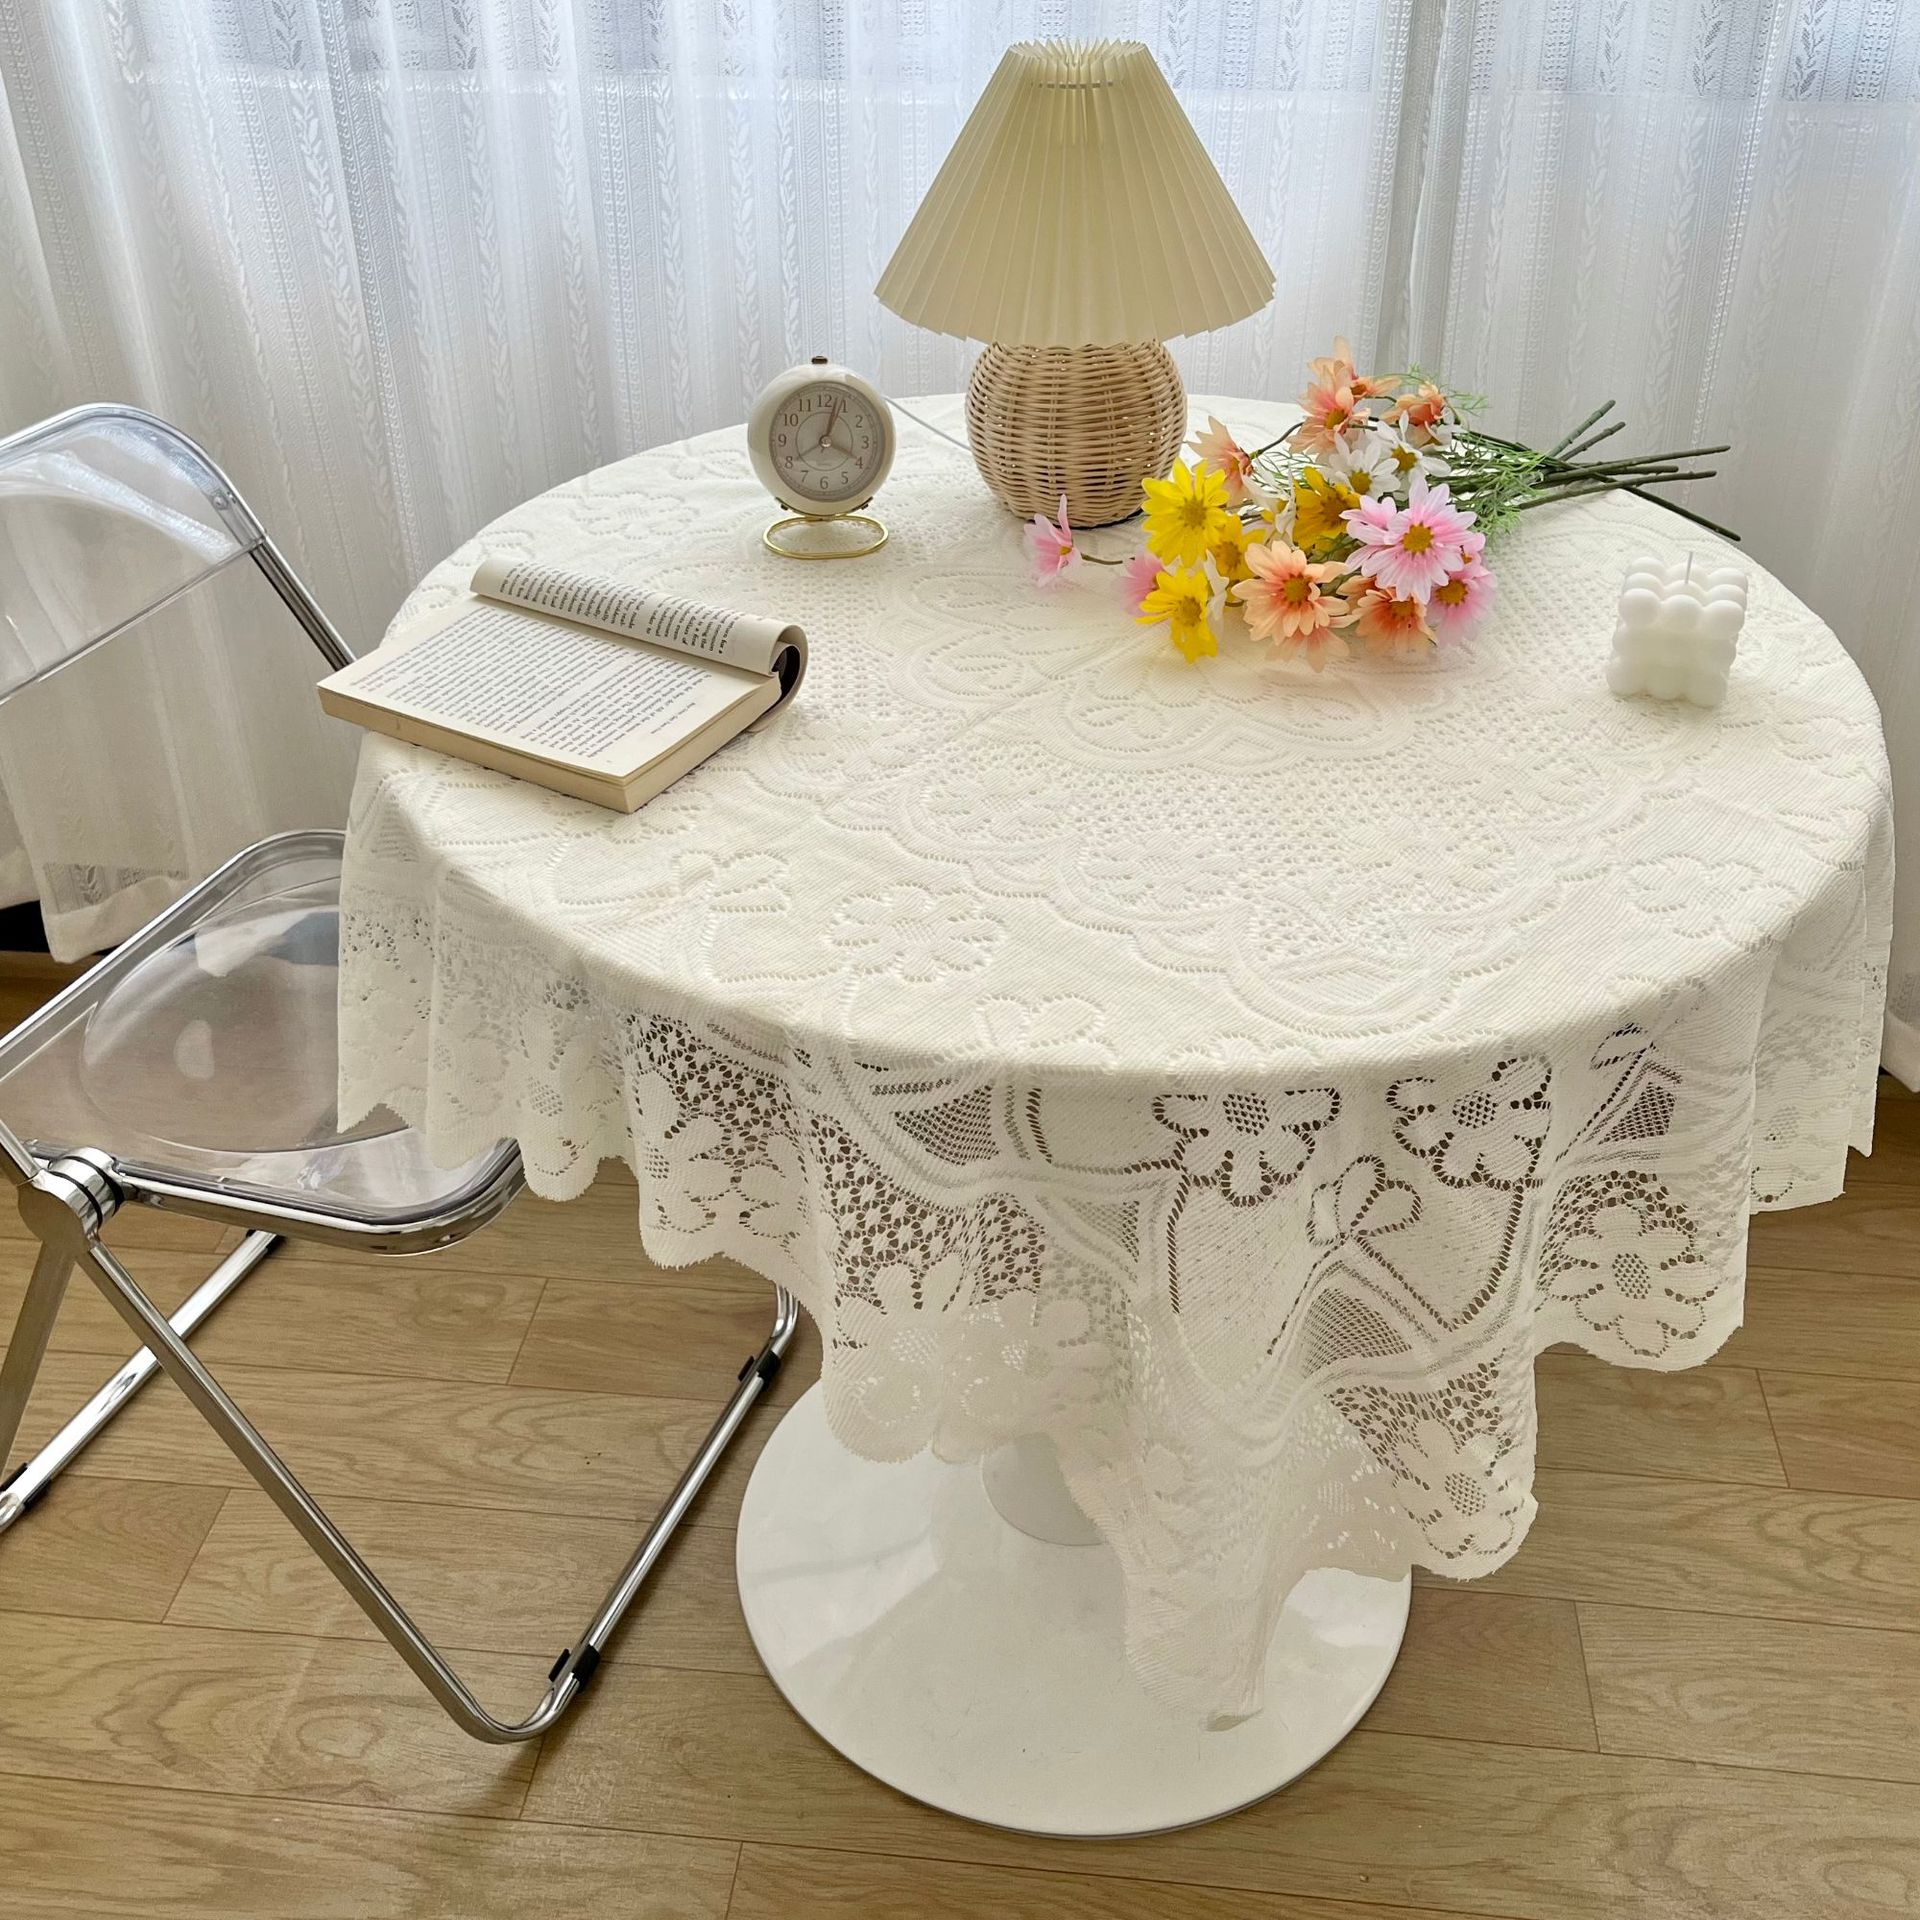 Lace Tablecloth Ins Vintage Crocheted round Table Square Tablecloth Coffee Table Bedside Table Sofa Refrigerator Dustproof Cover Towel